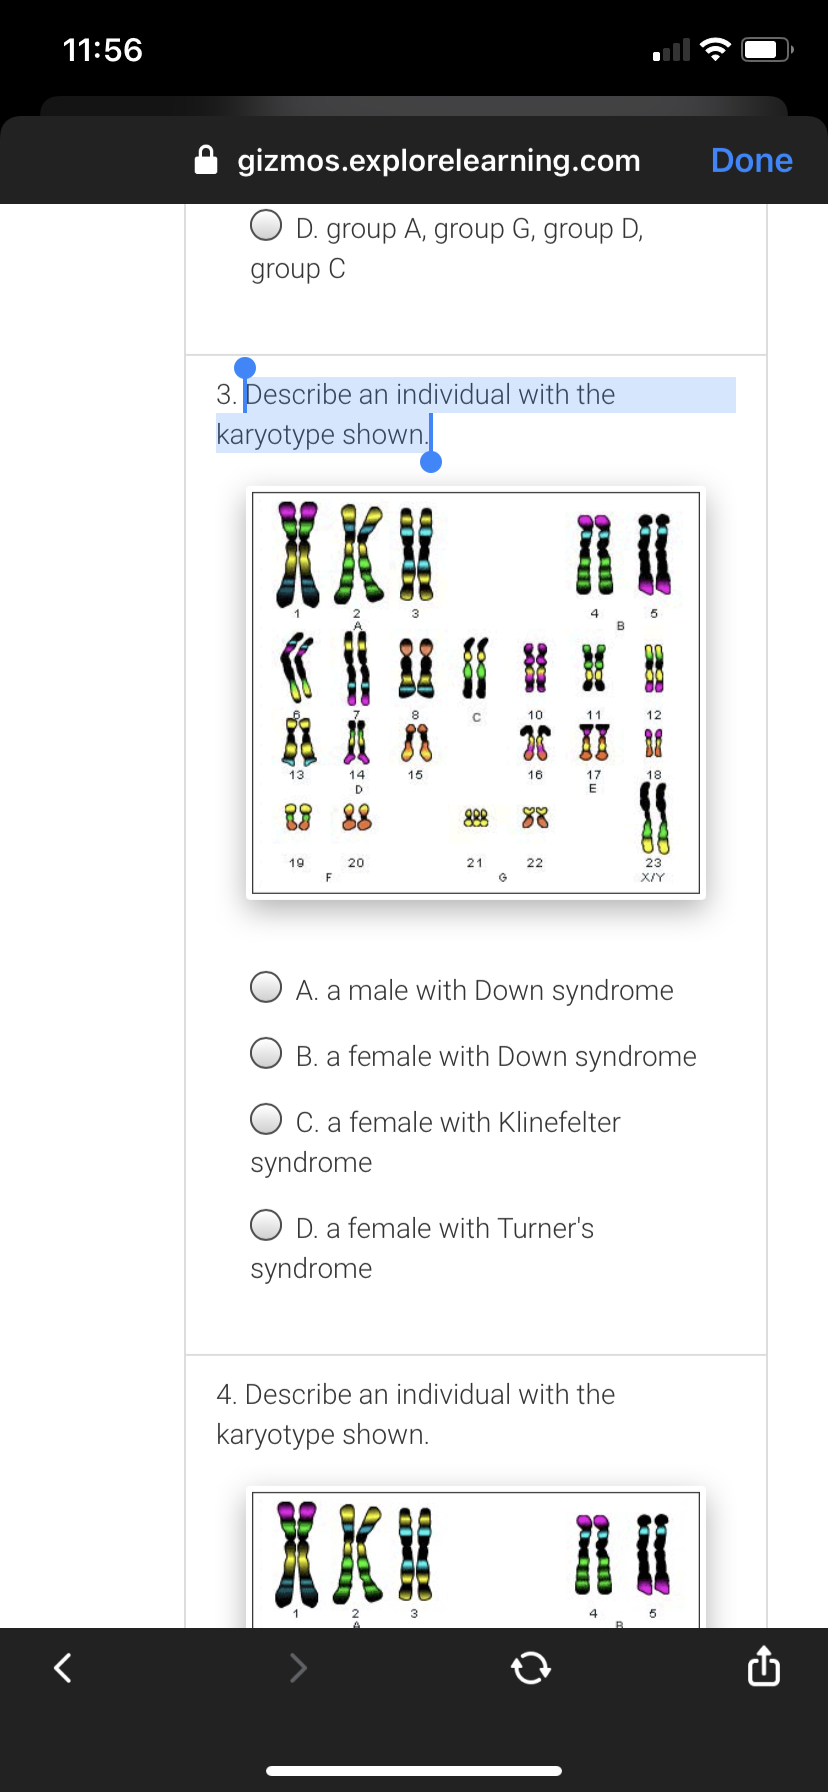 11:56
gizmos.explorelearning.com
Done
D. group A, group G, group D,
group C
3. Describe an individual with the
karyotype shown.
10
11
13
14
15
16
17
18
888
19
20
21
22
23
F
X/Y
O A. a male with Down syndrome
B. a female with Down syndrome
O C. a female with Klinefelter
syndrome
D. a female with Turner's
syndrome
4. Describe an individual with the
karyotype shown.
XKI
